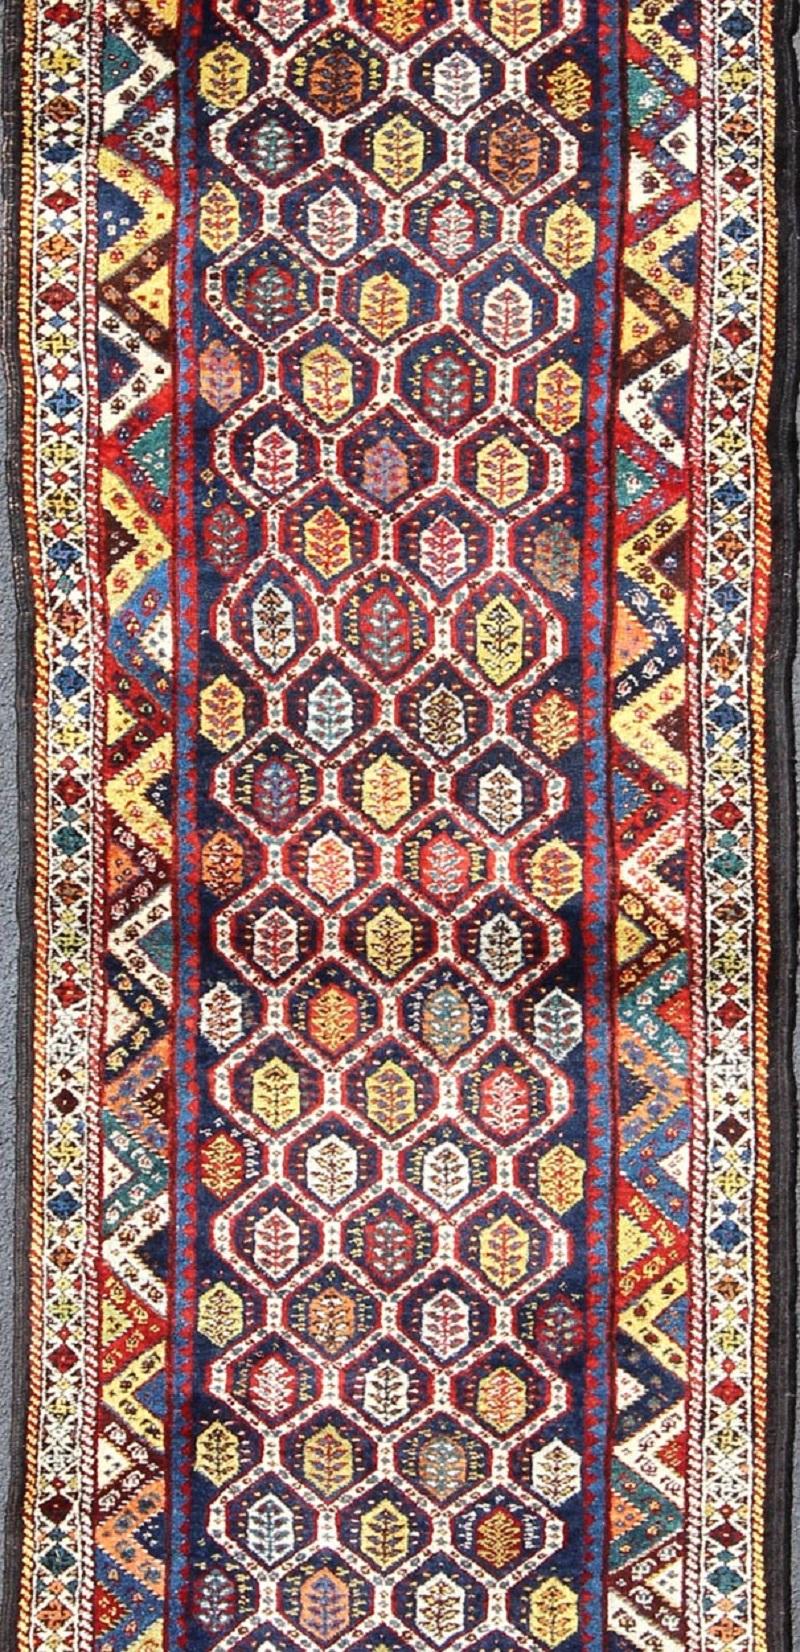 Tribal Colorful Antique Persian Lori Runner with Repeating Geometric Palmette Design For Sale